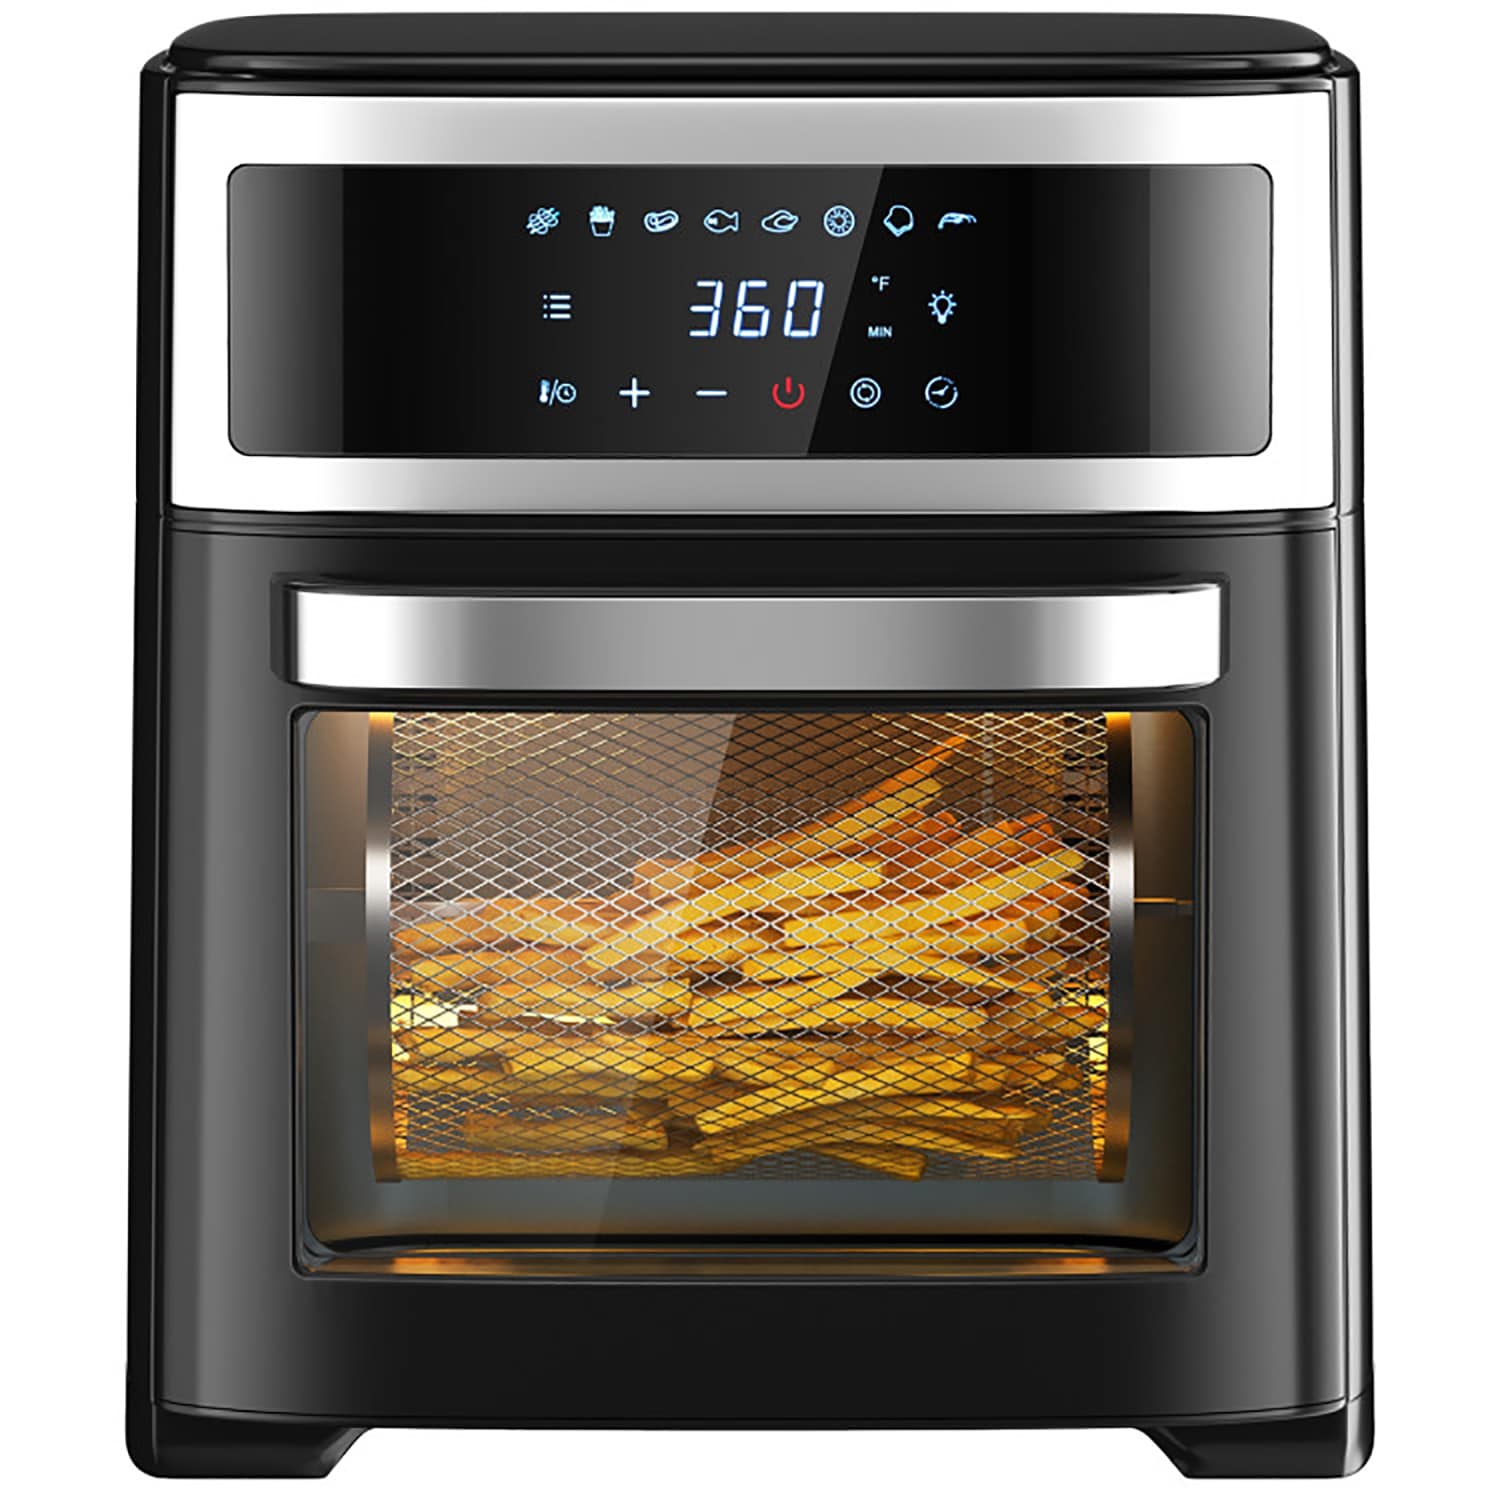  CROWNFUL Air Fryer Toaster Oven, 32 Quart Convection